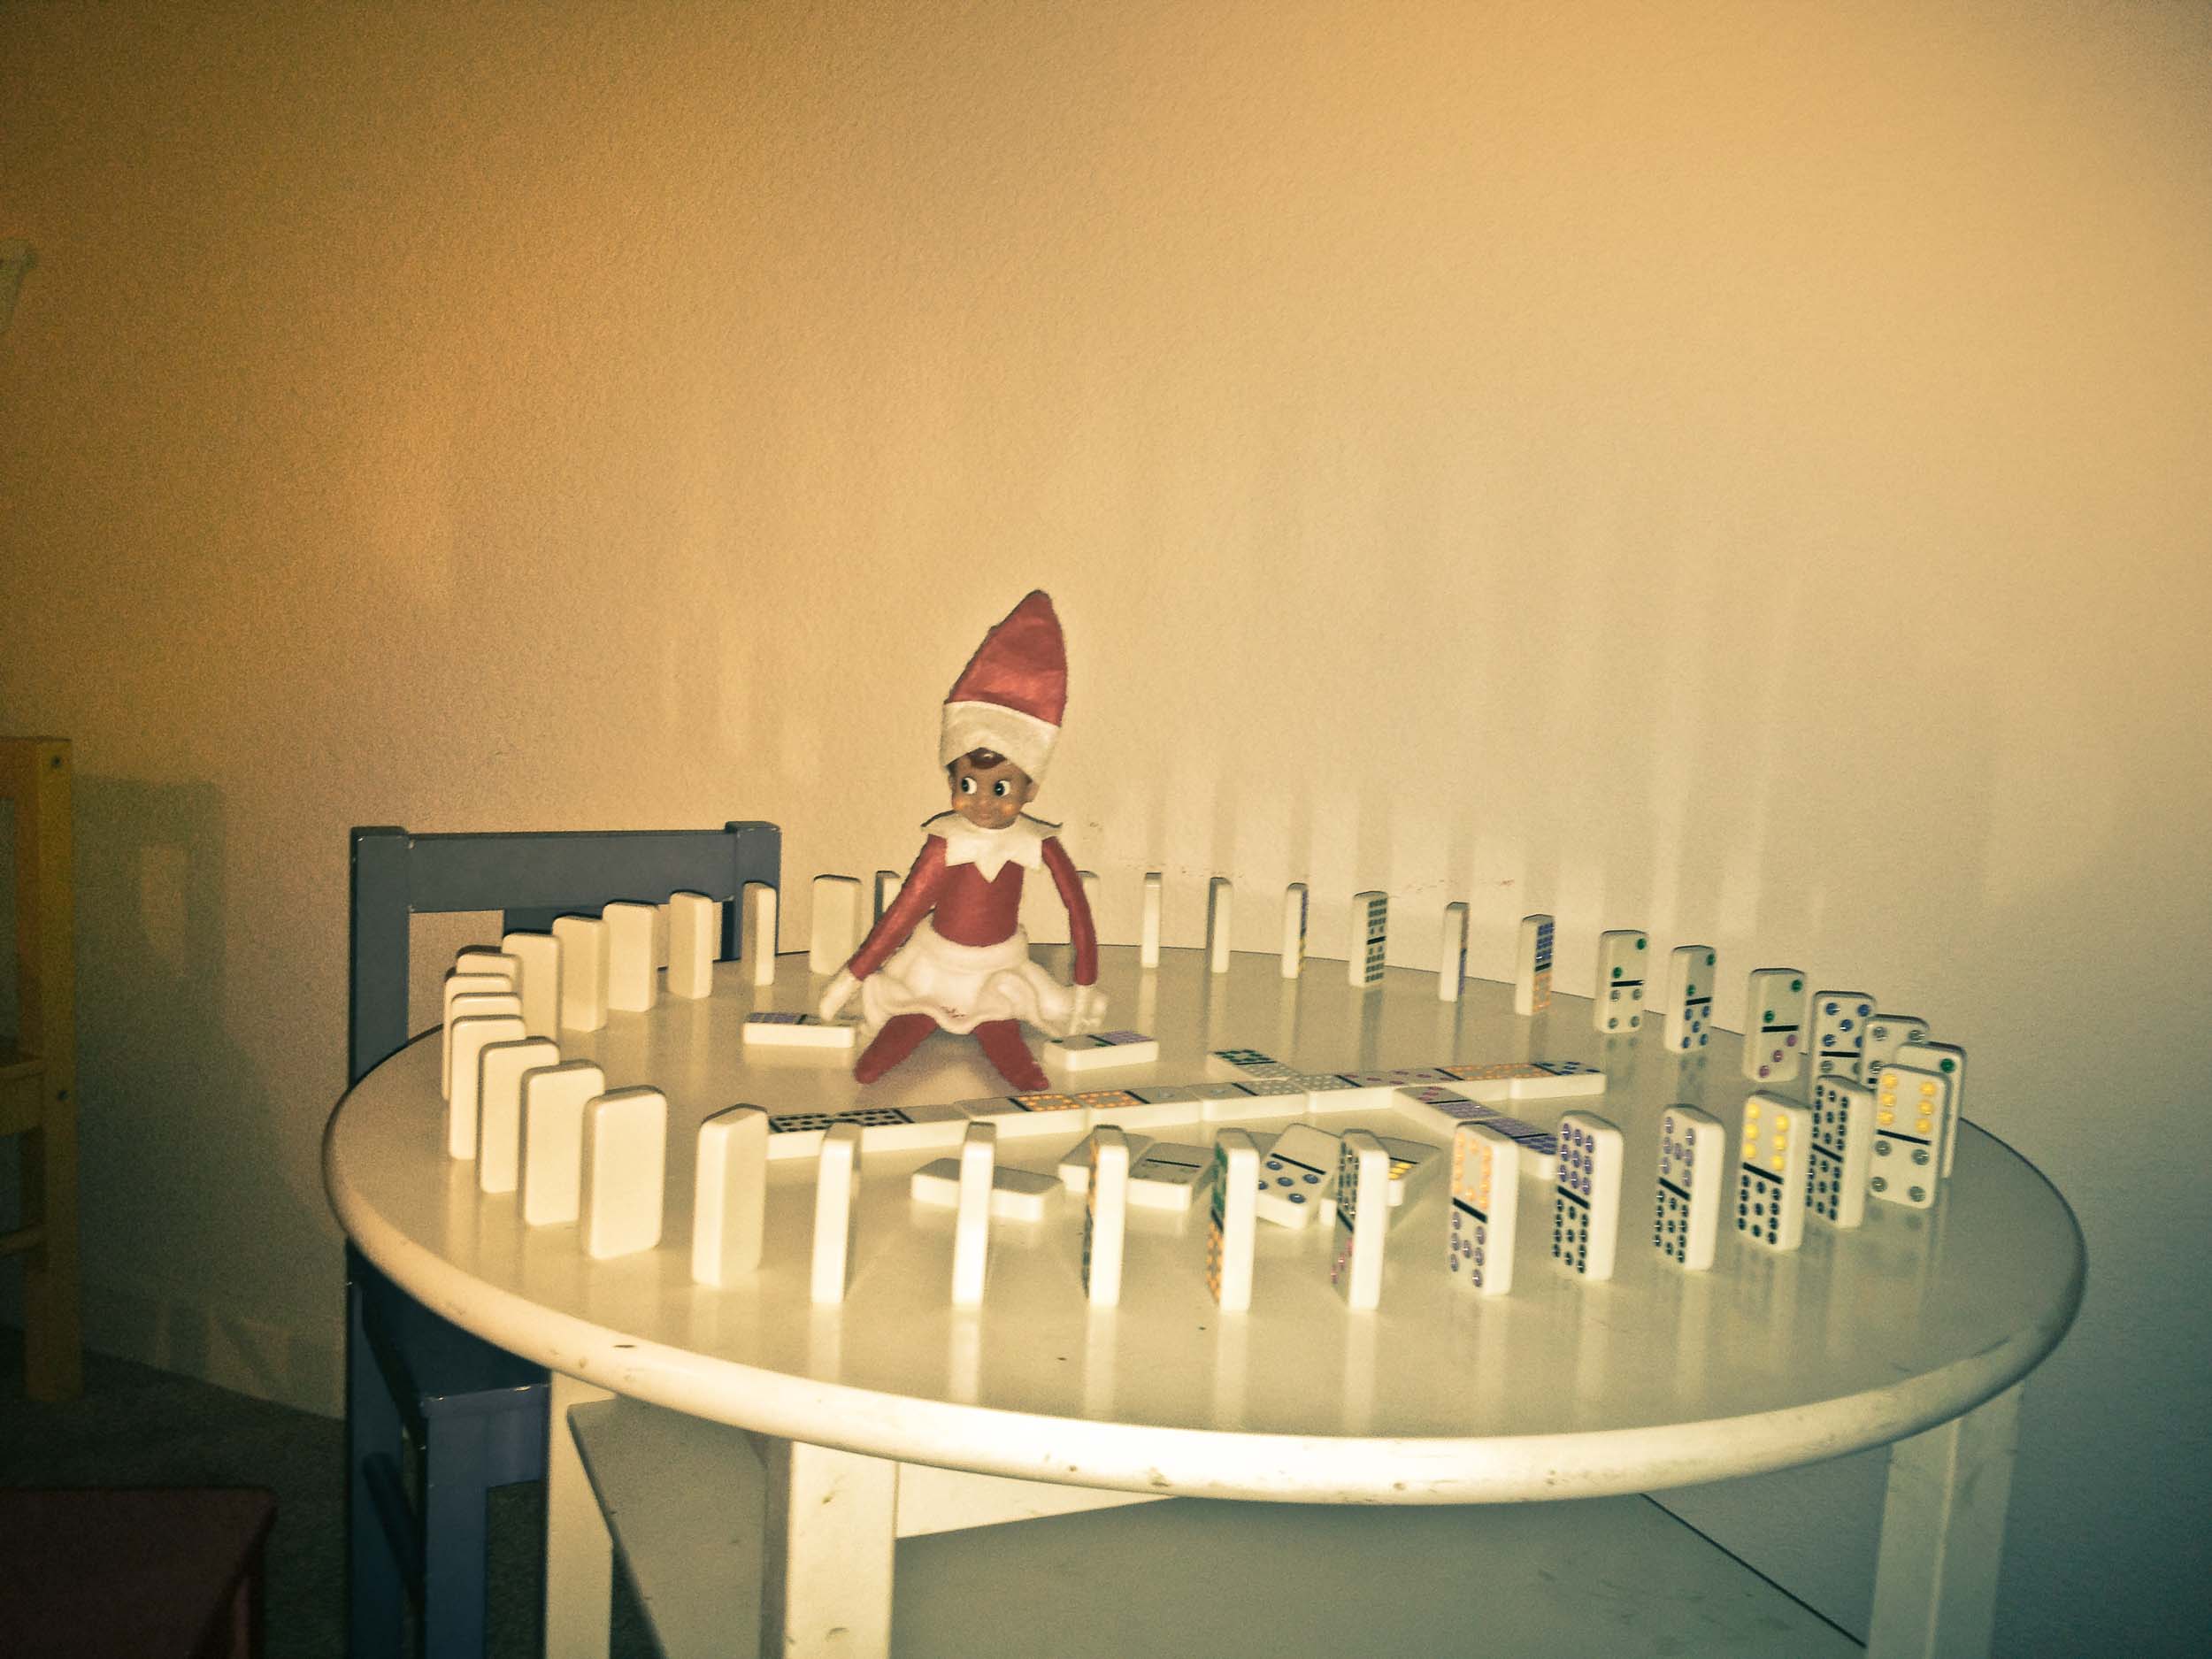 Our very own Elf on the Shelf | Windy Pinwheel